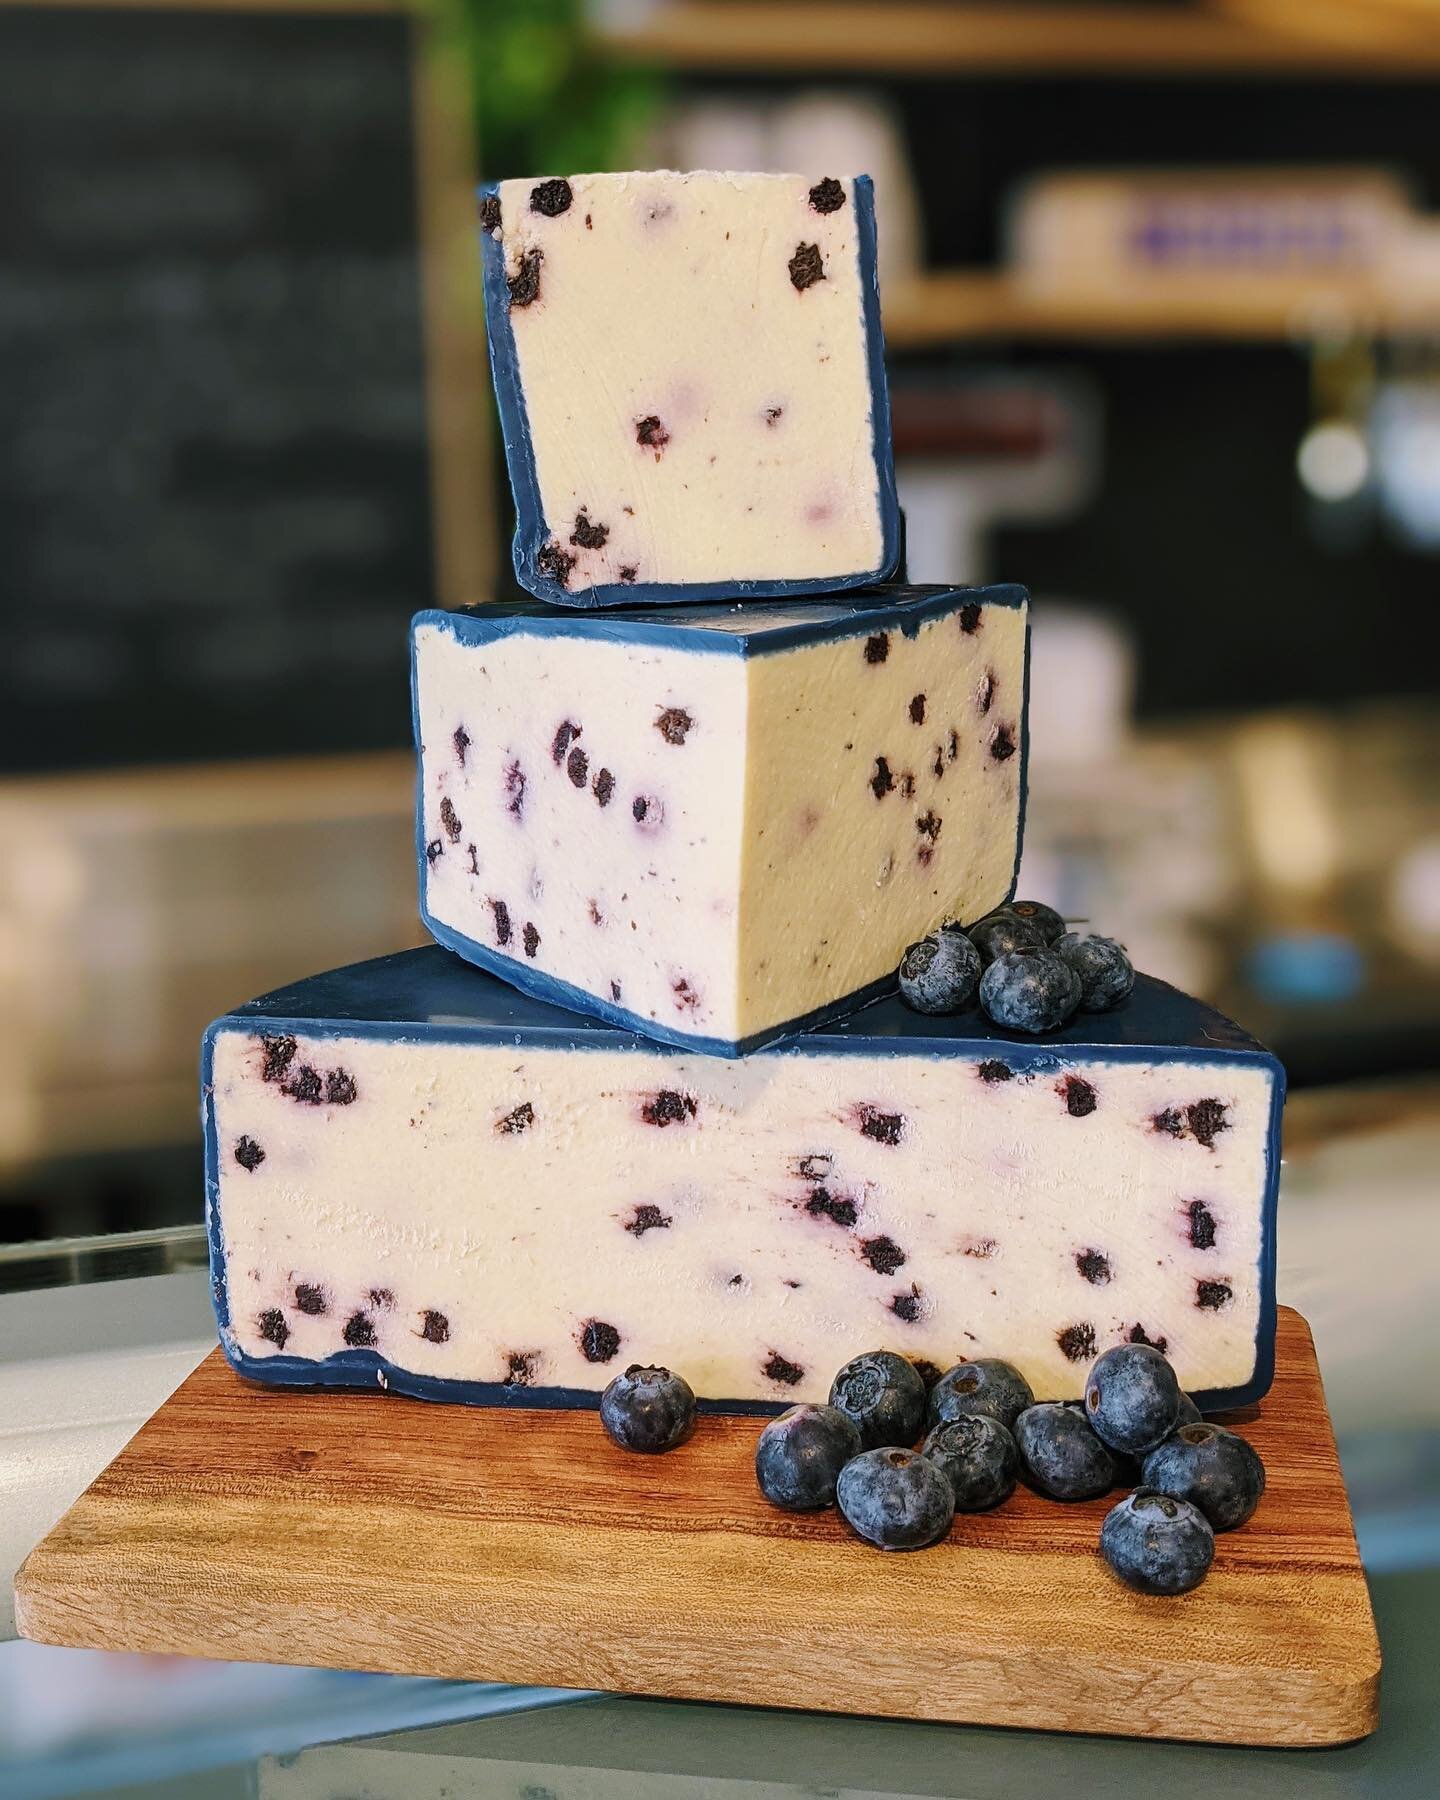 🧀🫐 A very traditional cheese, Wensleydale is one of the oldest British cheeses, records showing Cistercian Monks making it as far back as 1150 😯

Traditionally served with fruit or fruitcake, Wensleydale with Blueberries cuts out the middle man an